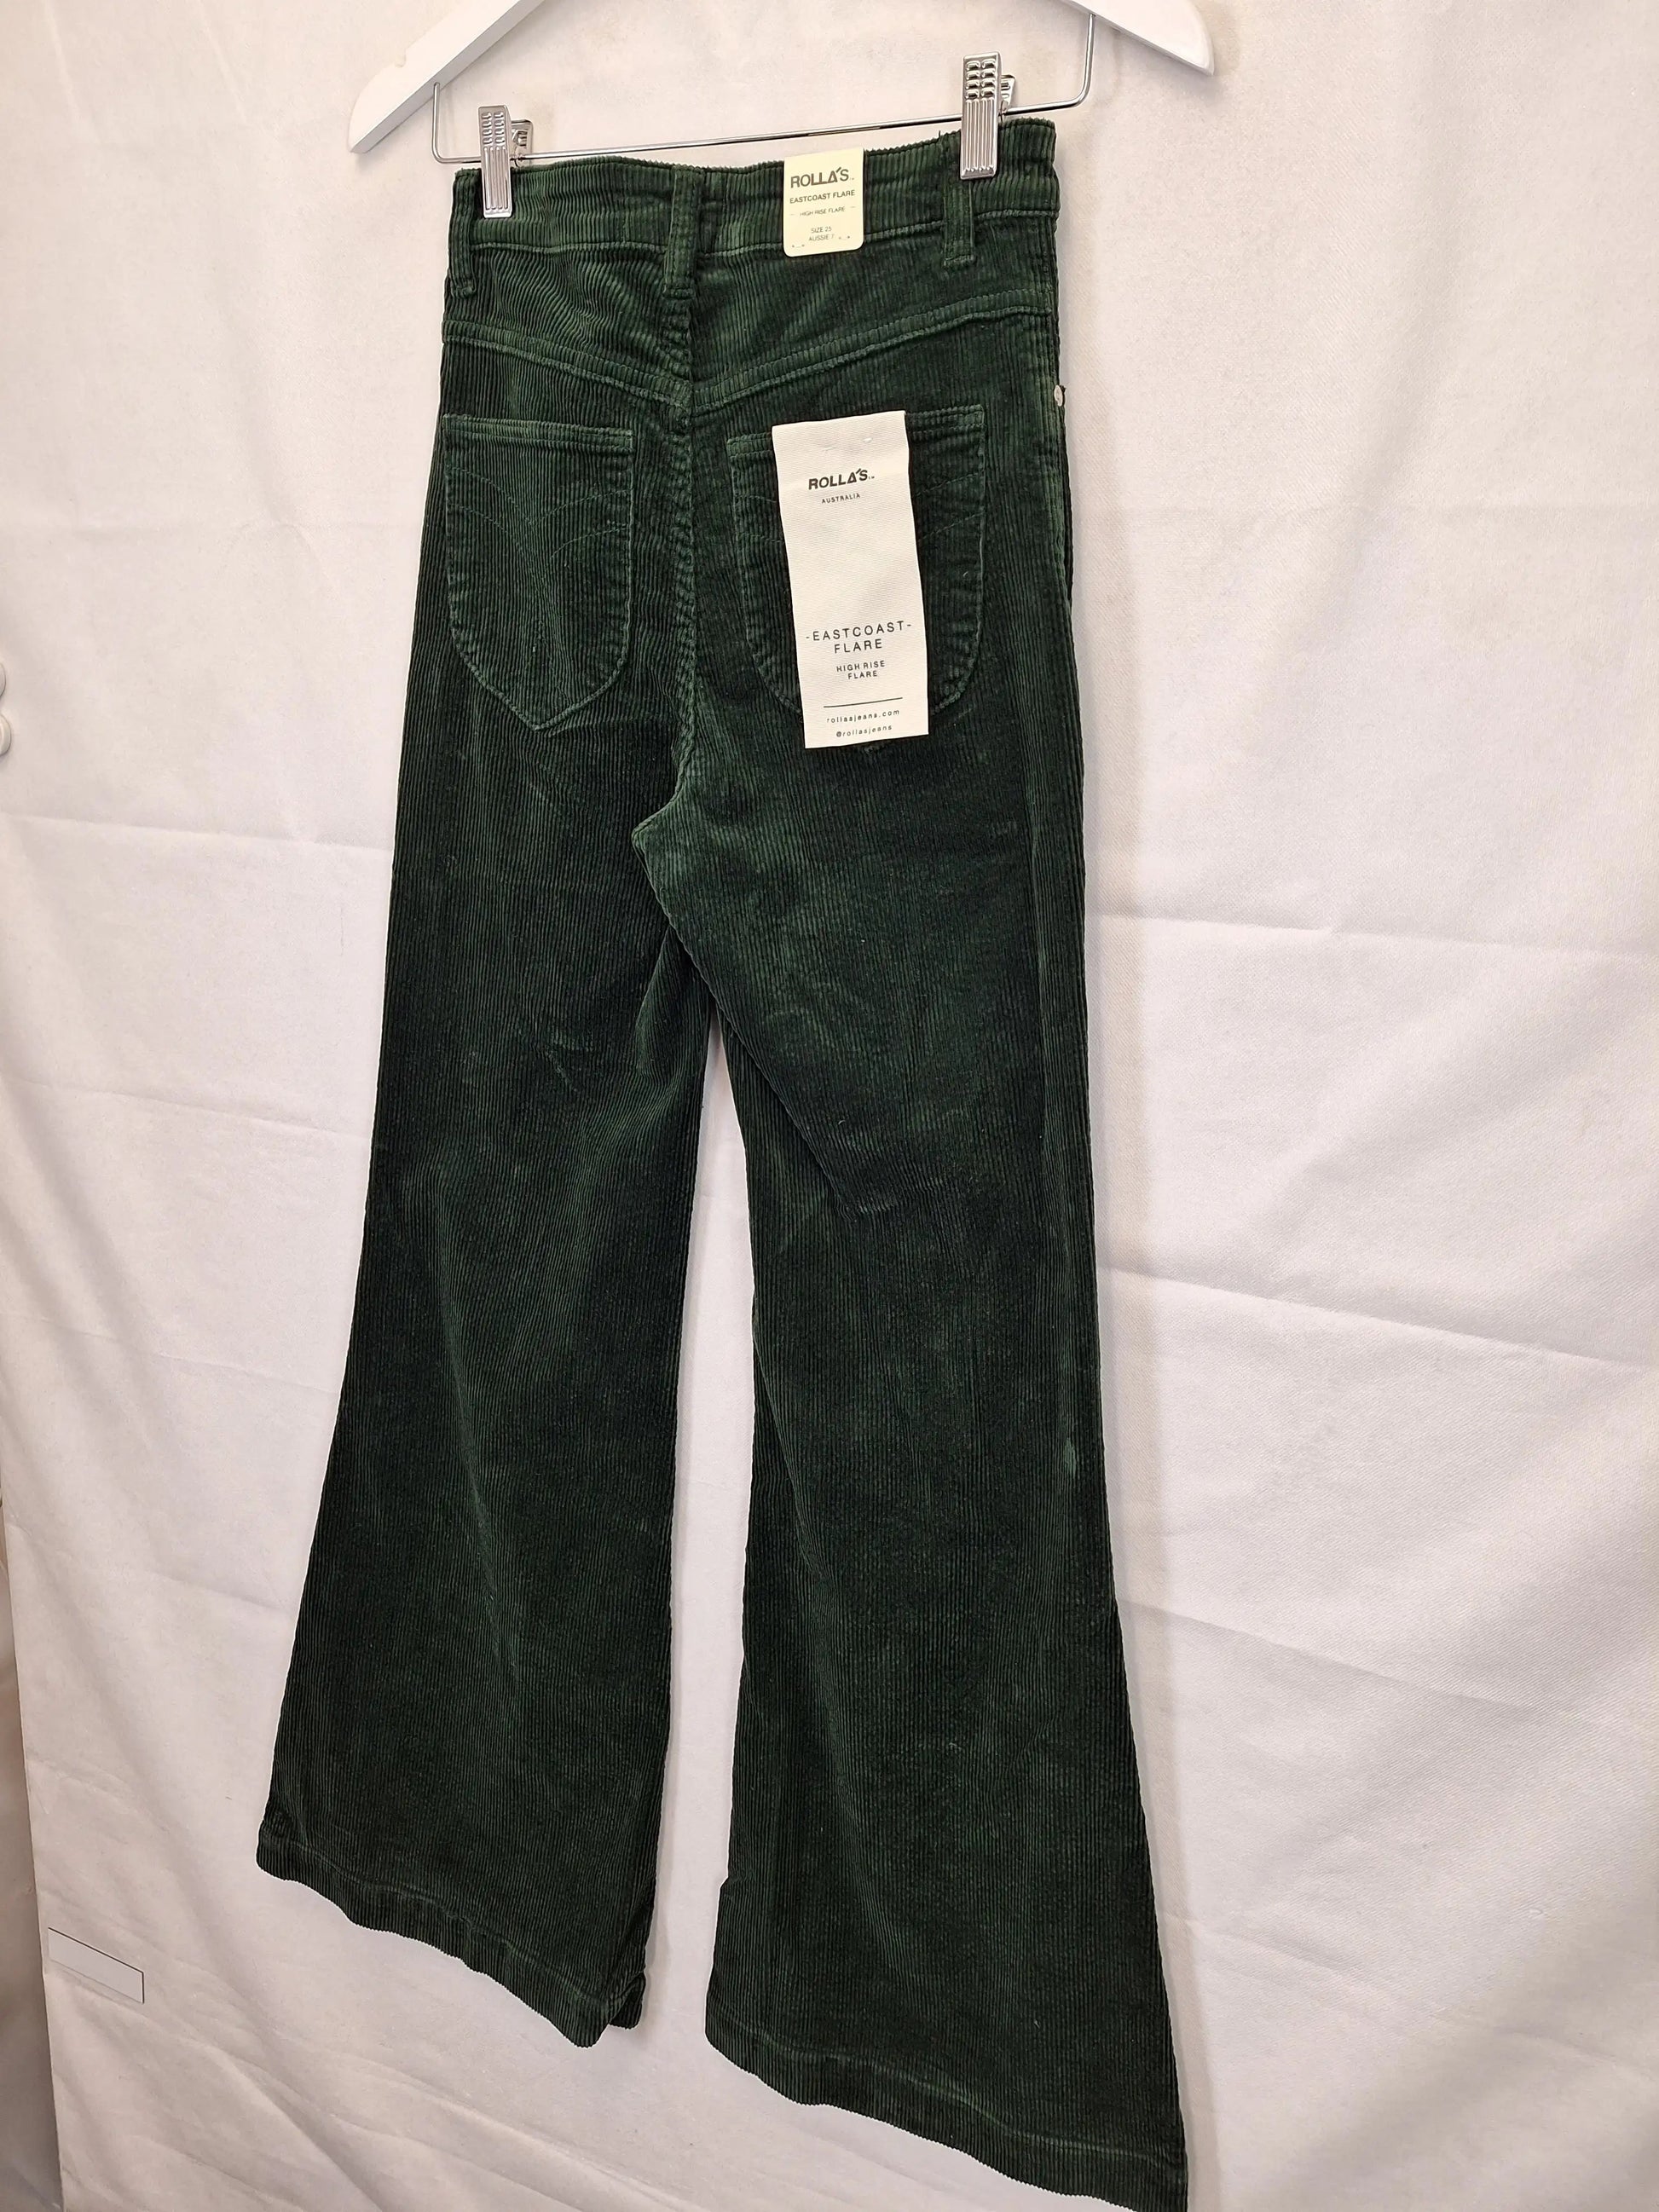 Rolla's Eastcoast Flare Ivy Cord Pants Size 6 by SwapUp-Online Second Hand Store-Online Thrift Store